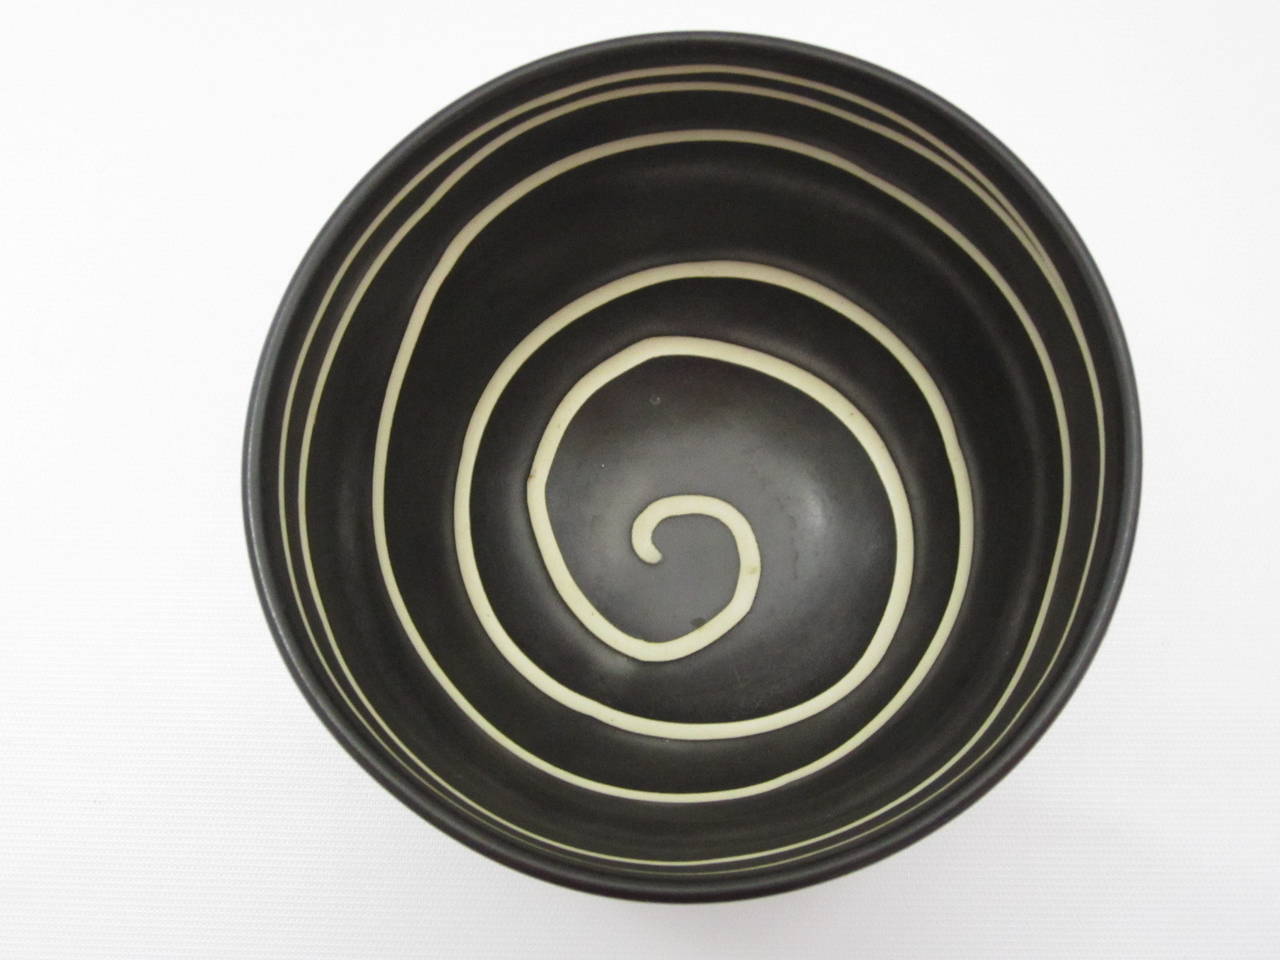 Late 20th Century Black and White Ceramic Art Pottery Bowl by Ken Edwards